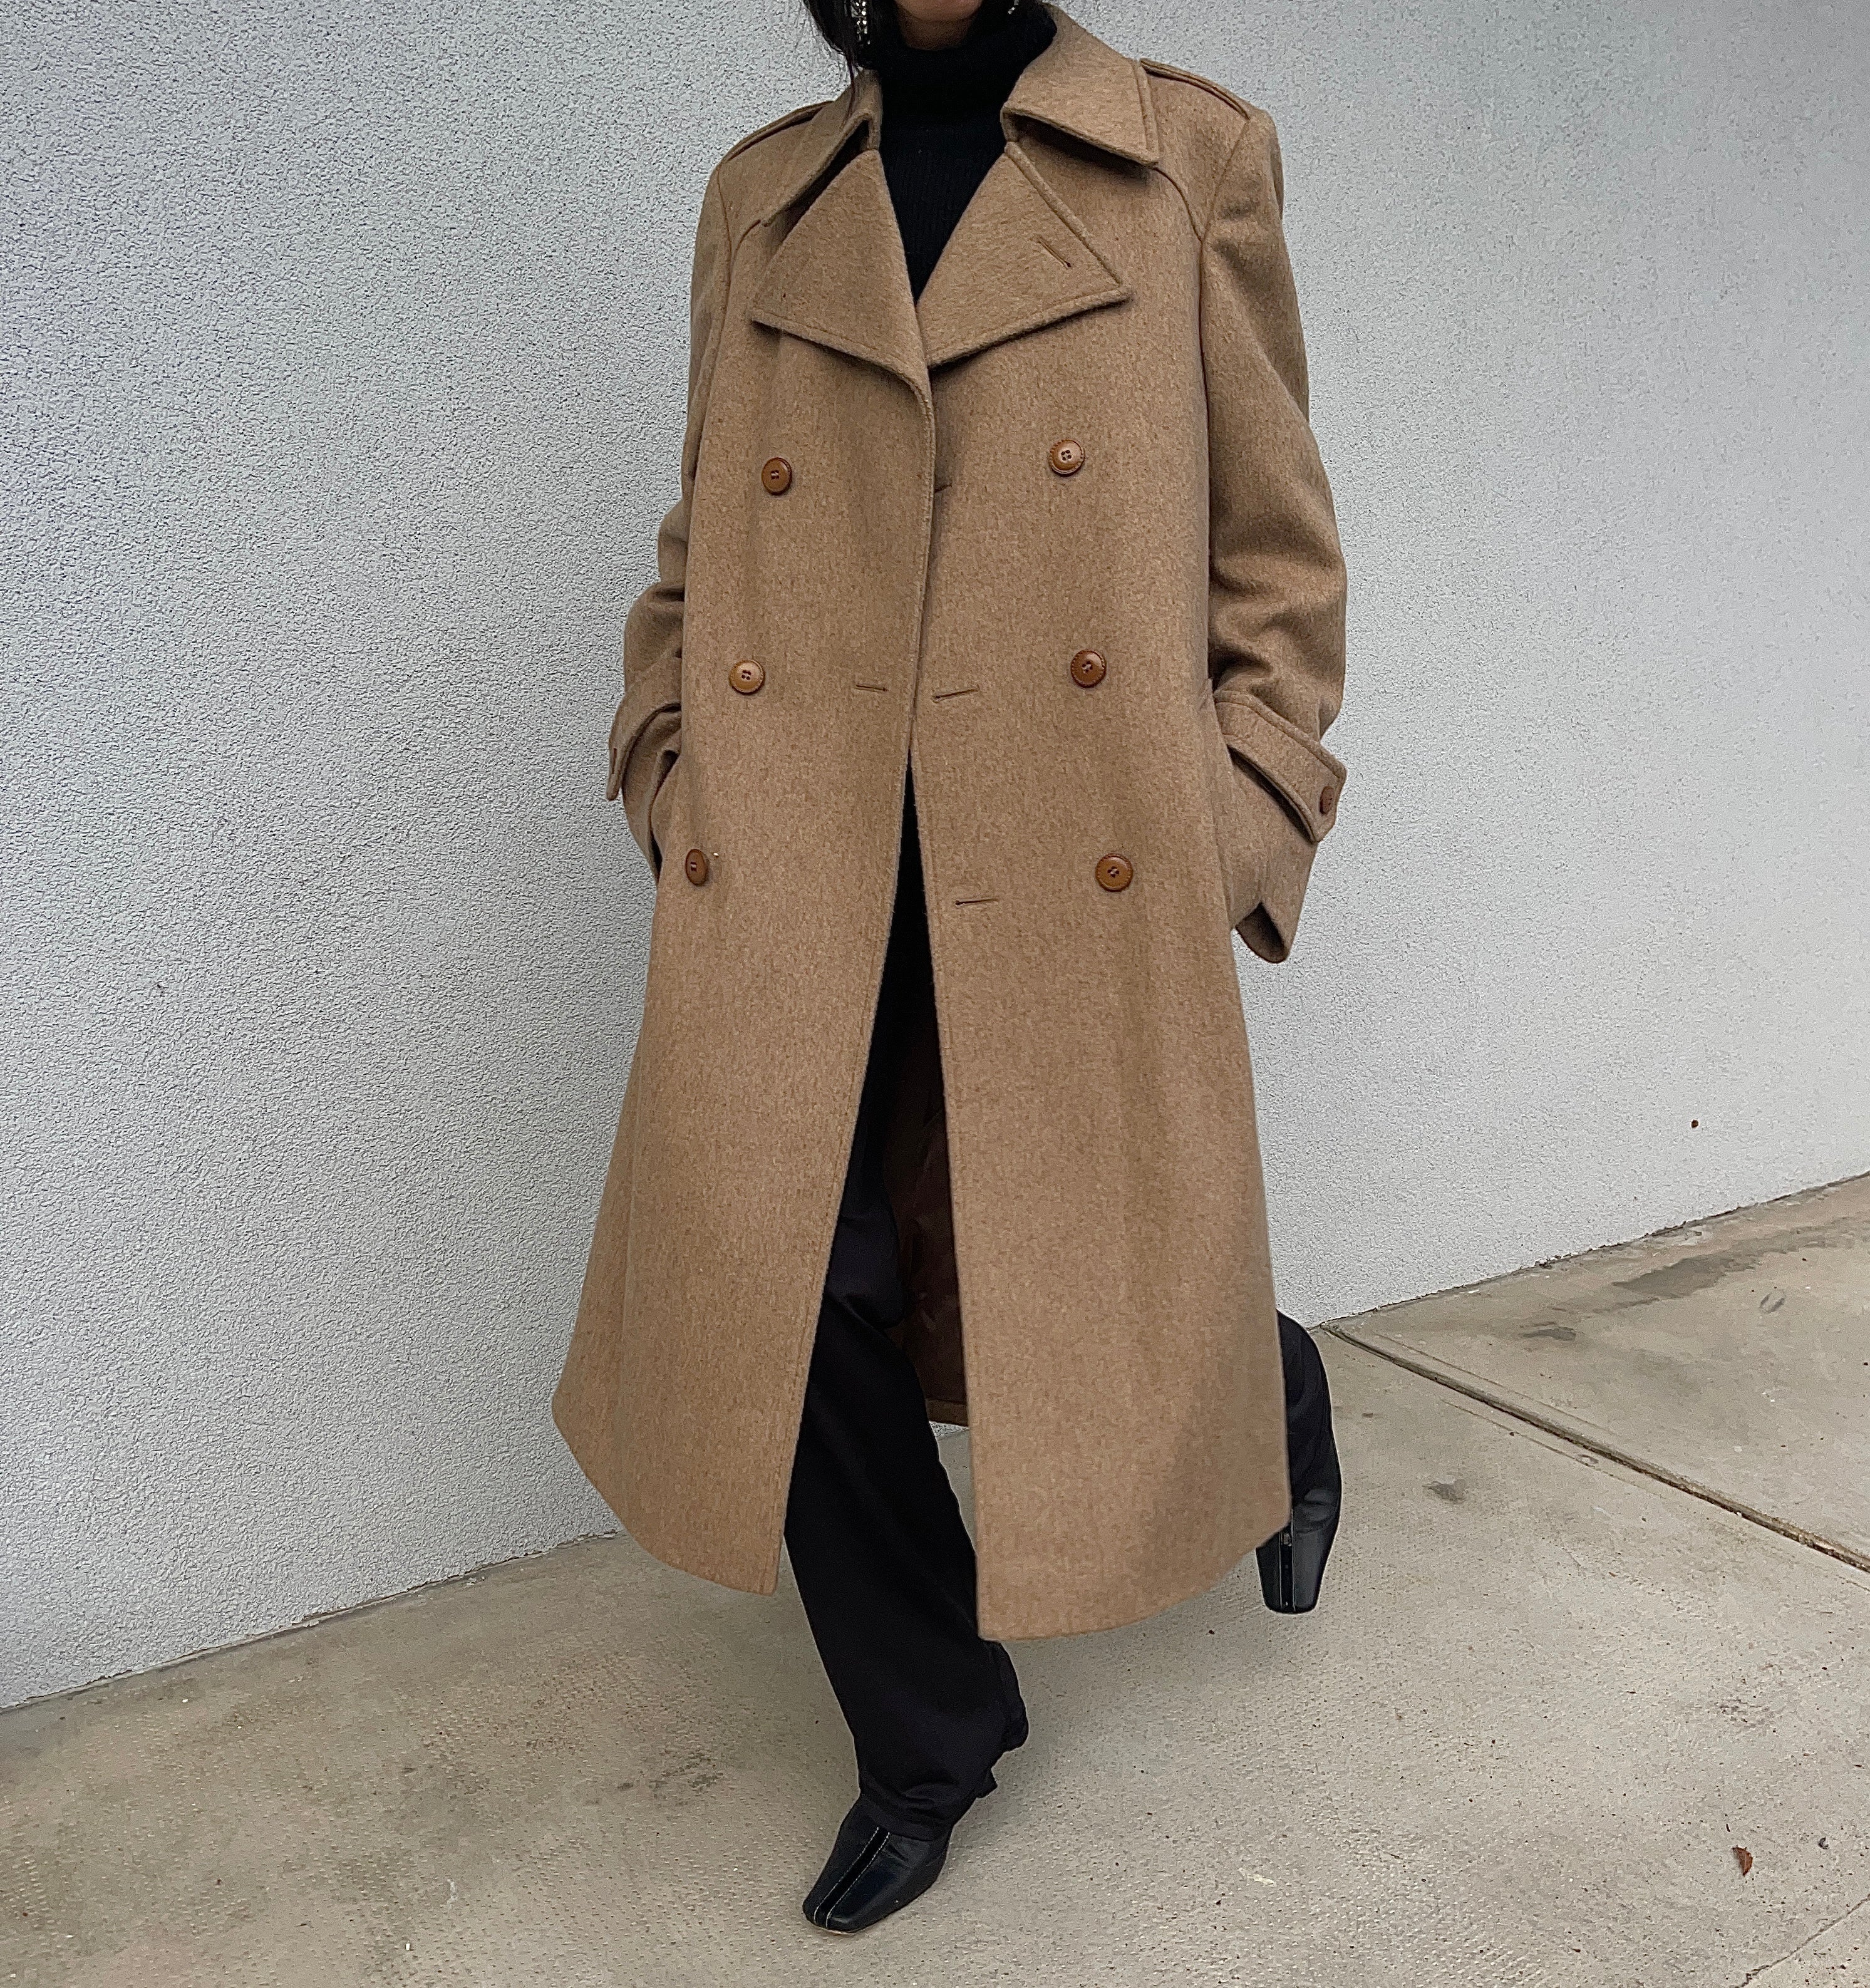 Trench or coat?